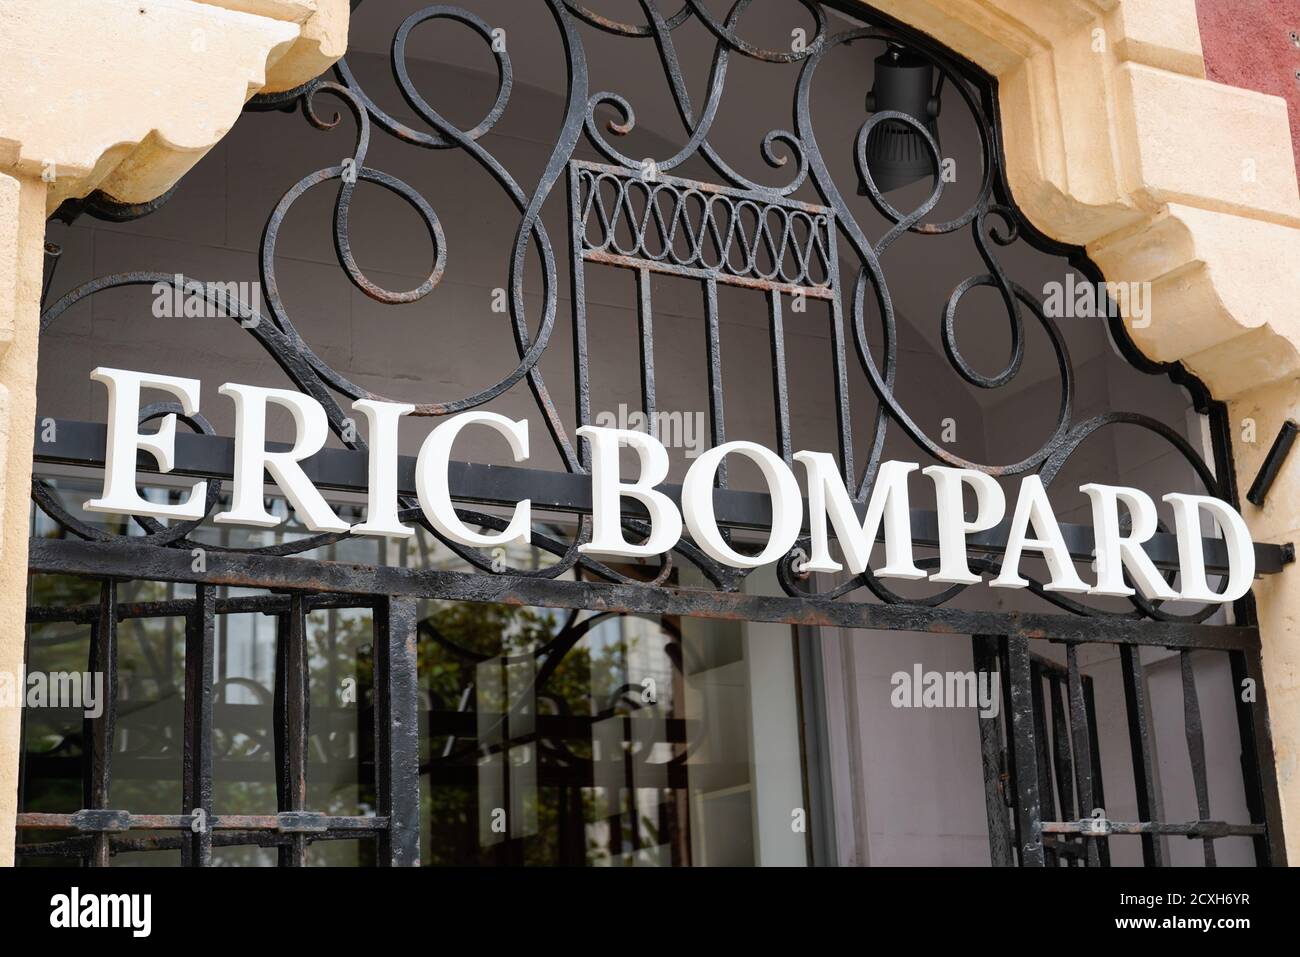 Bordeaux , Aquitaine / France - 09 25 2020 : Eric bompard text sign and  logo front of luxury store French House boutique of Kashmir shop Stock  Photo - Alamy